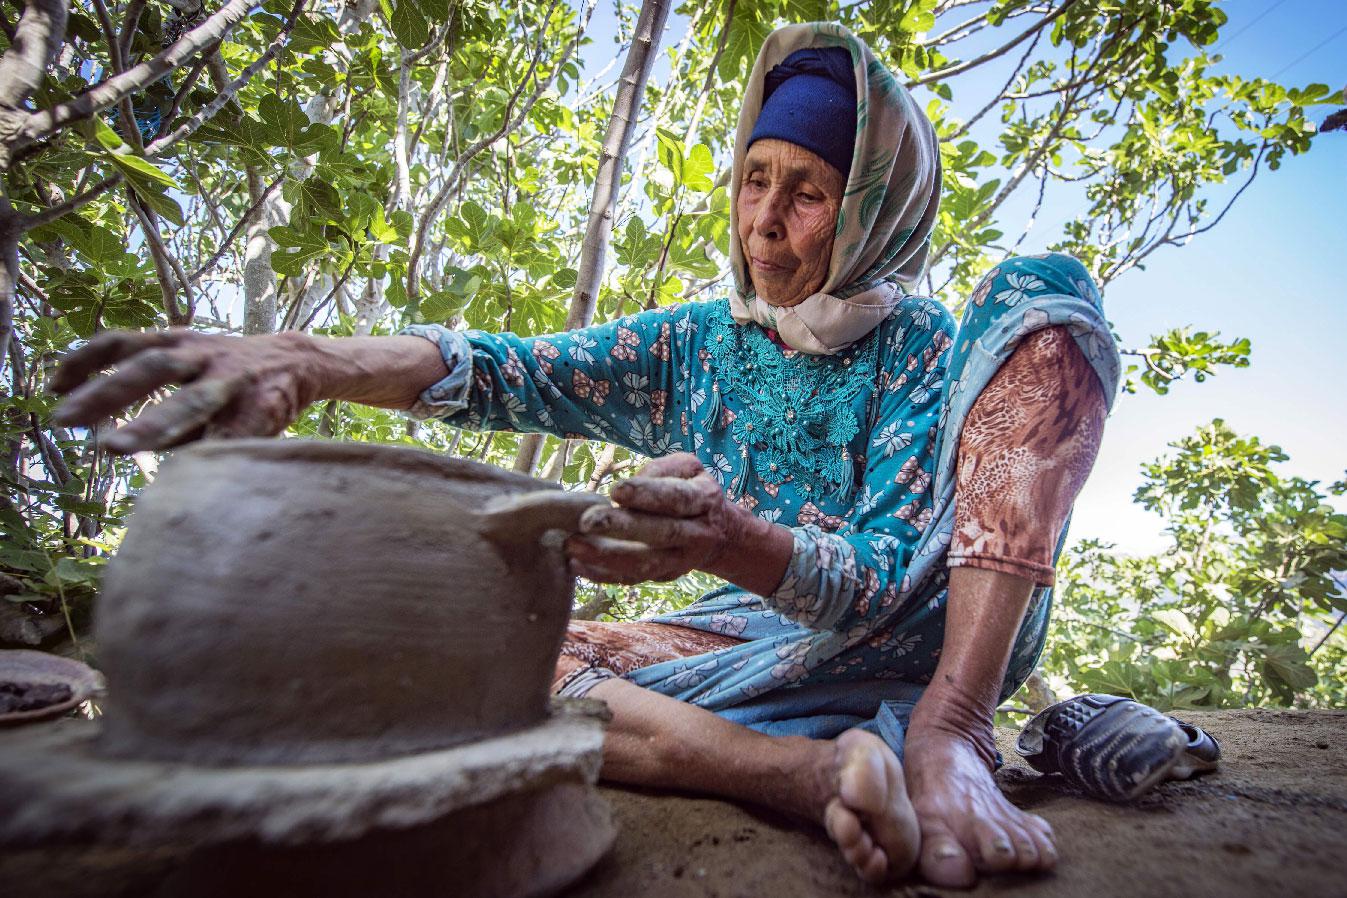 Moroccan potter Fatima Harama from the M'tioua tribe works on pottery near the village of Ourtzagh